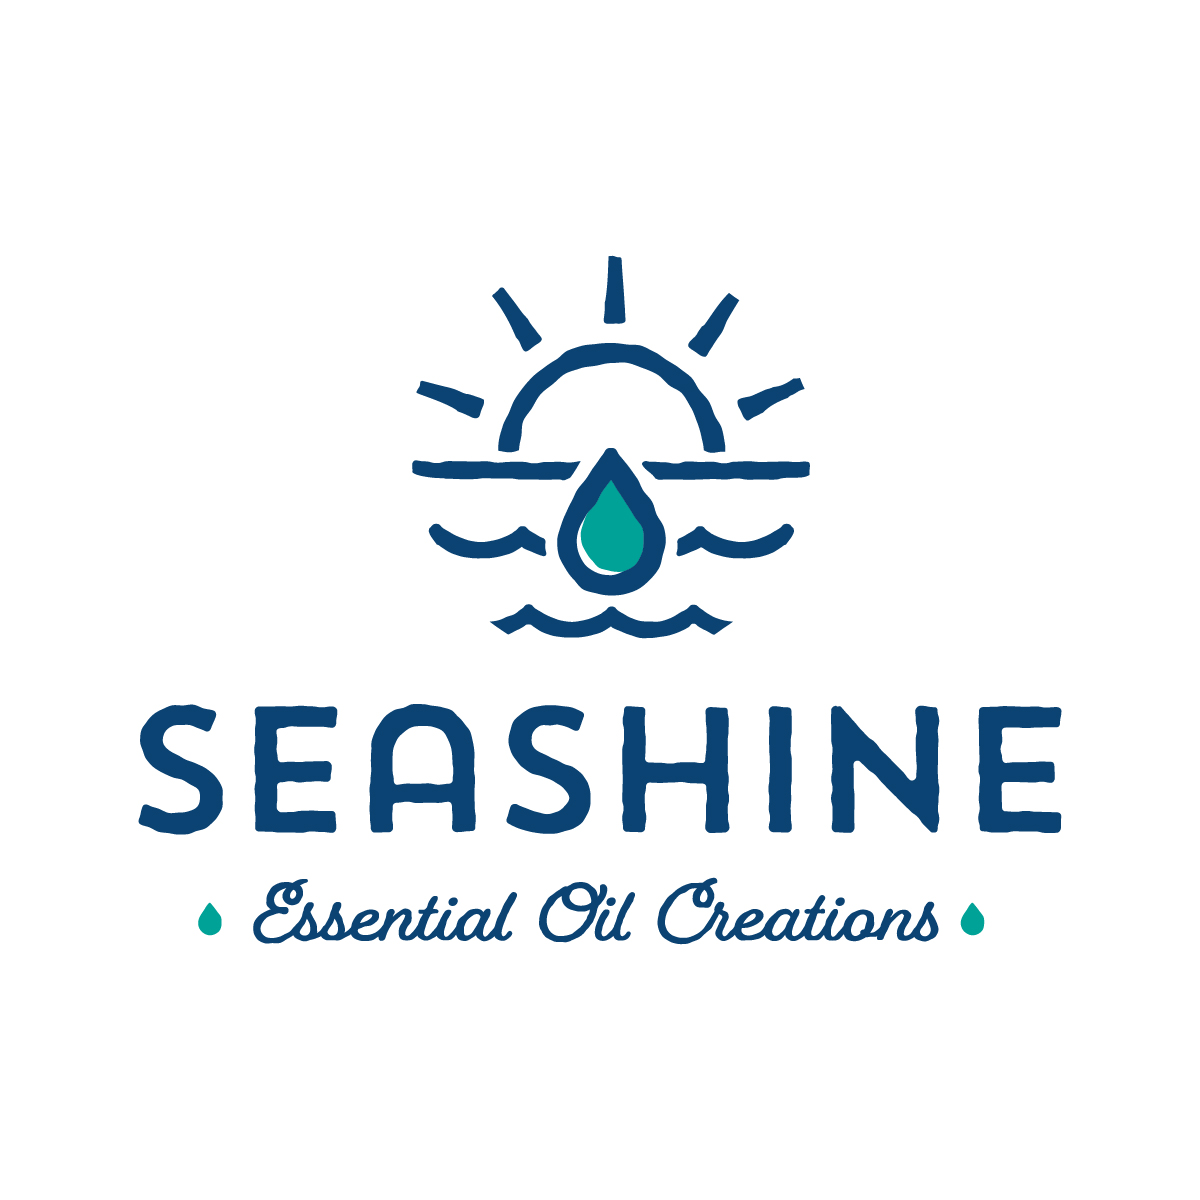 Seashine Essential Oil Creations logo design by logo designer Chad Ehlinger for your inspiration and for the worlds largest logo competition